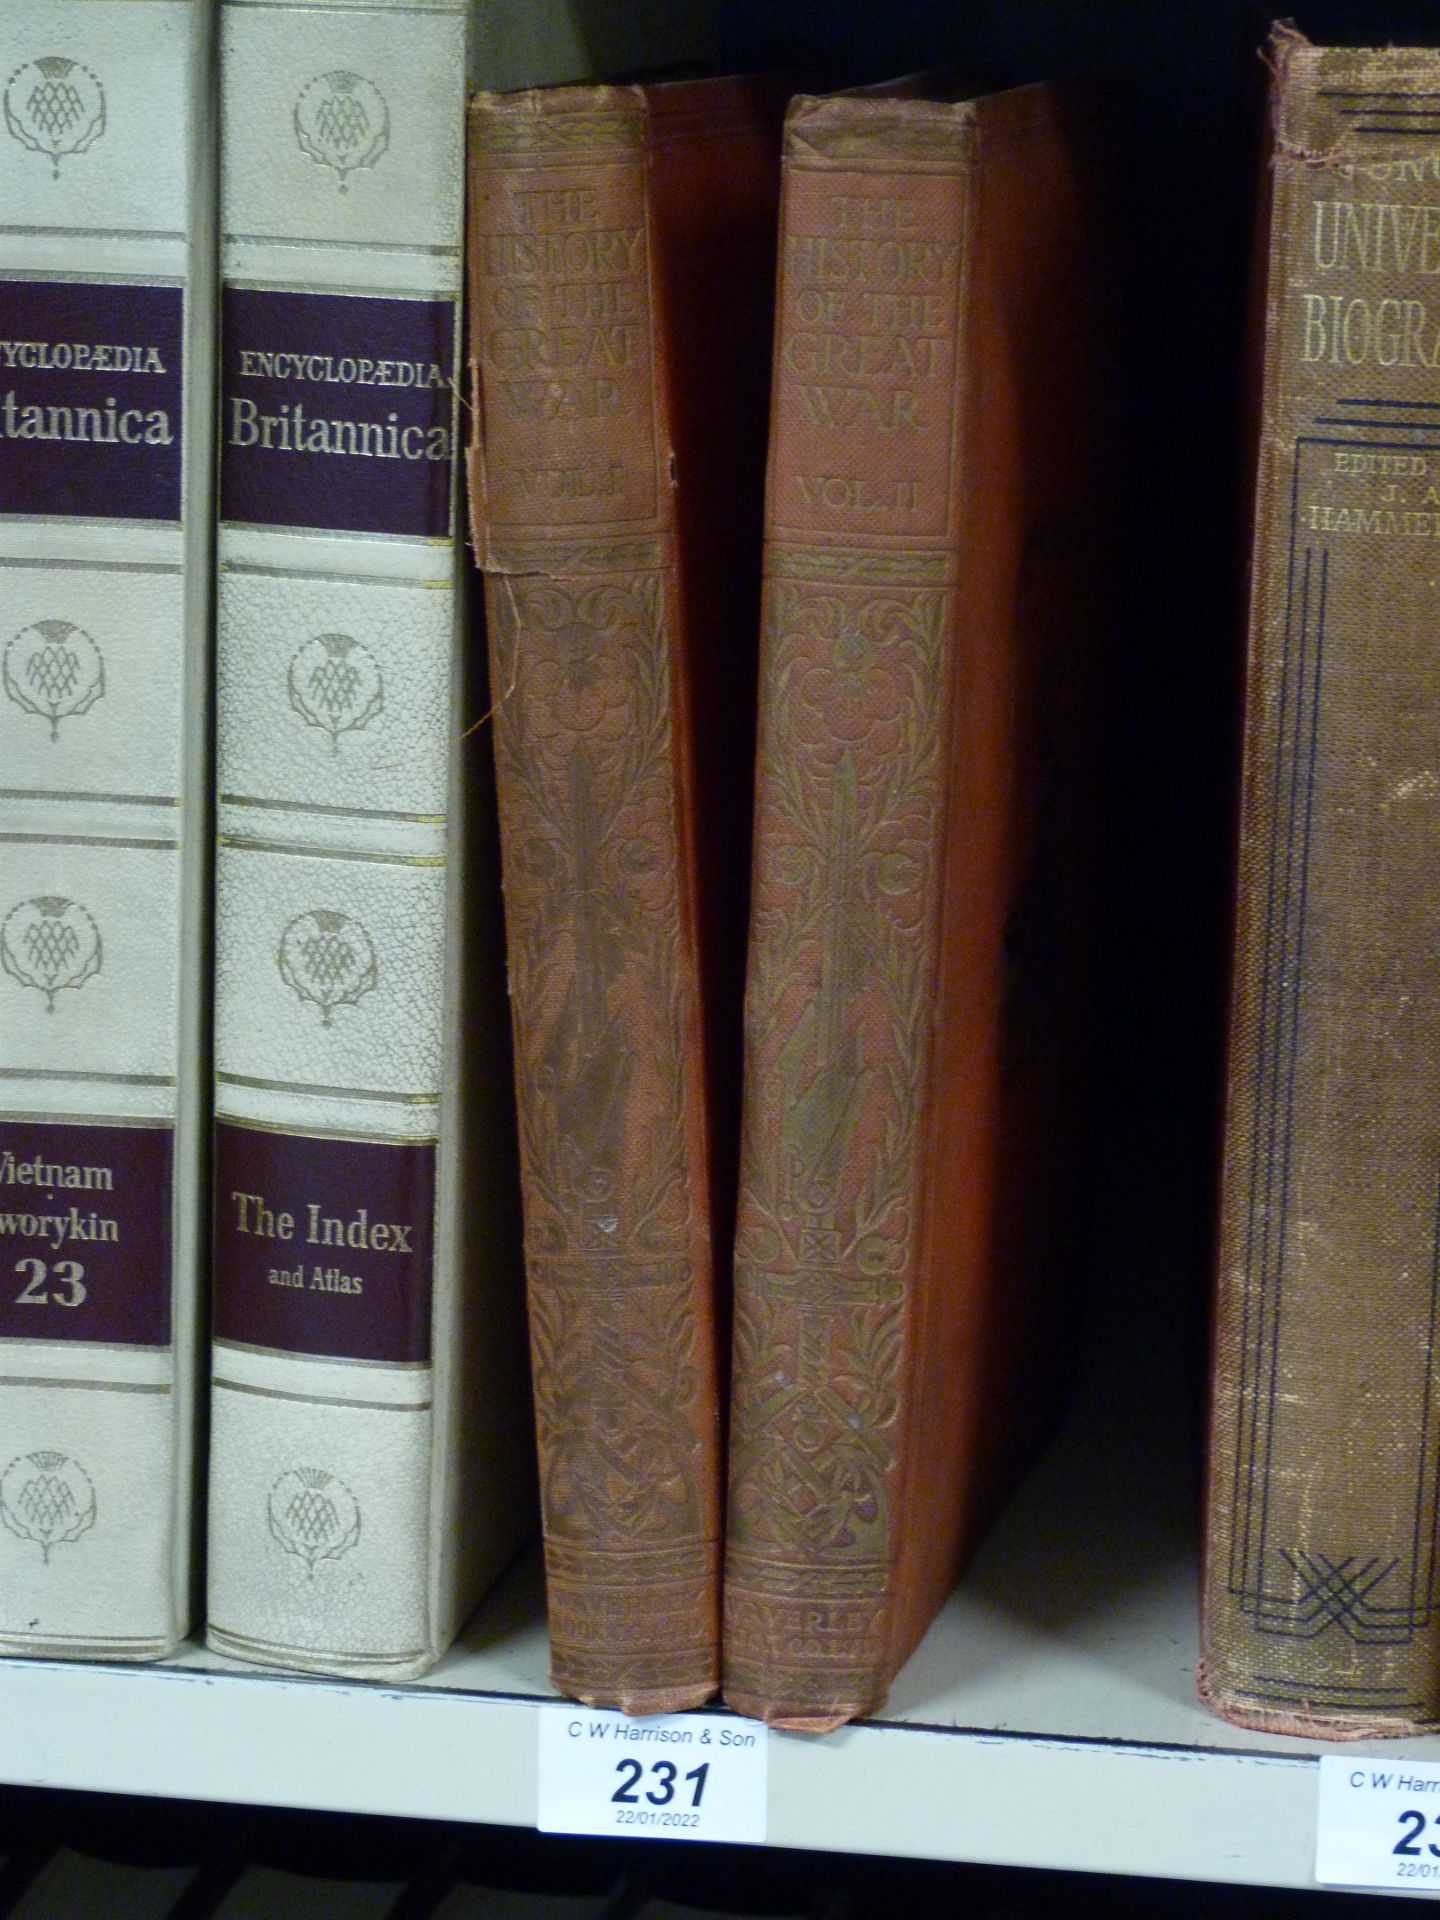 Volumes 1 and 2 of the Story of the Great War